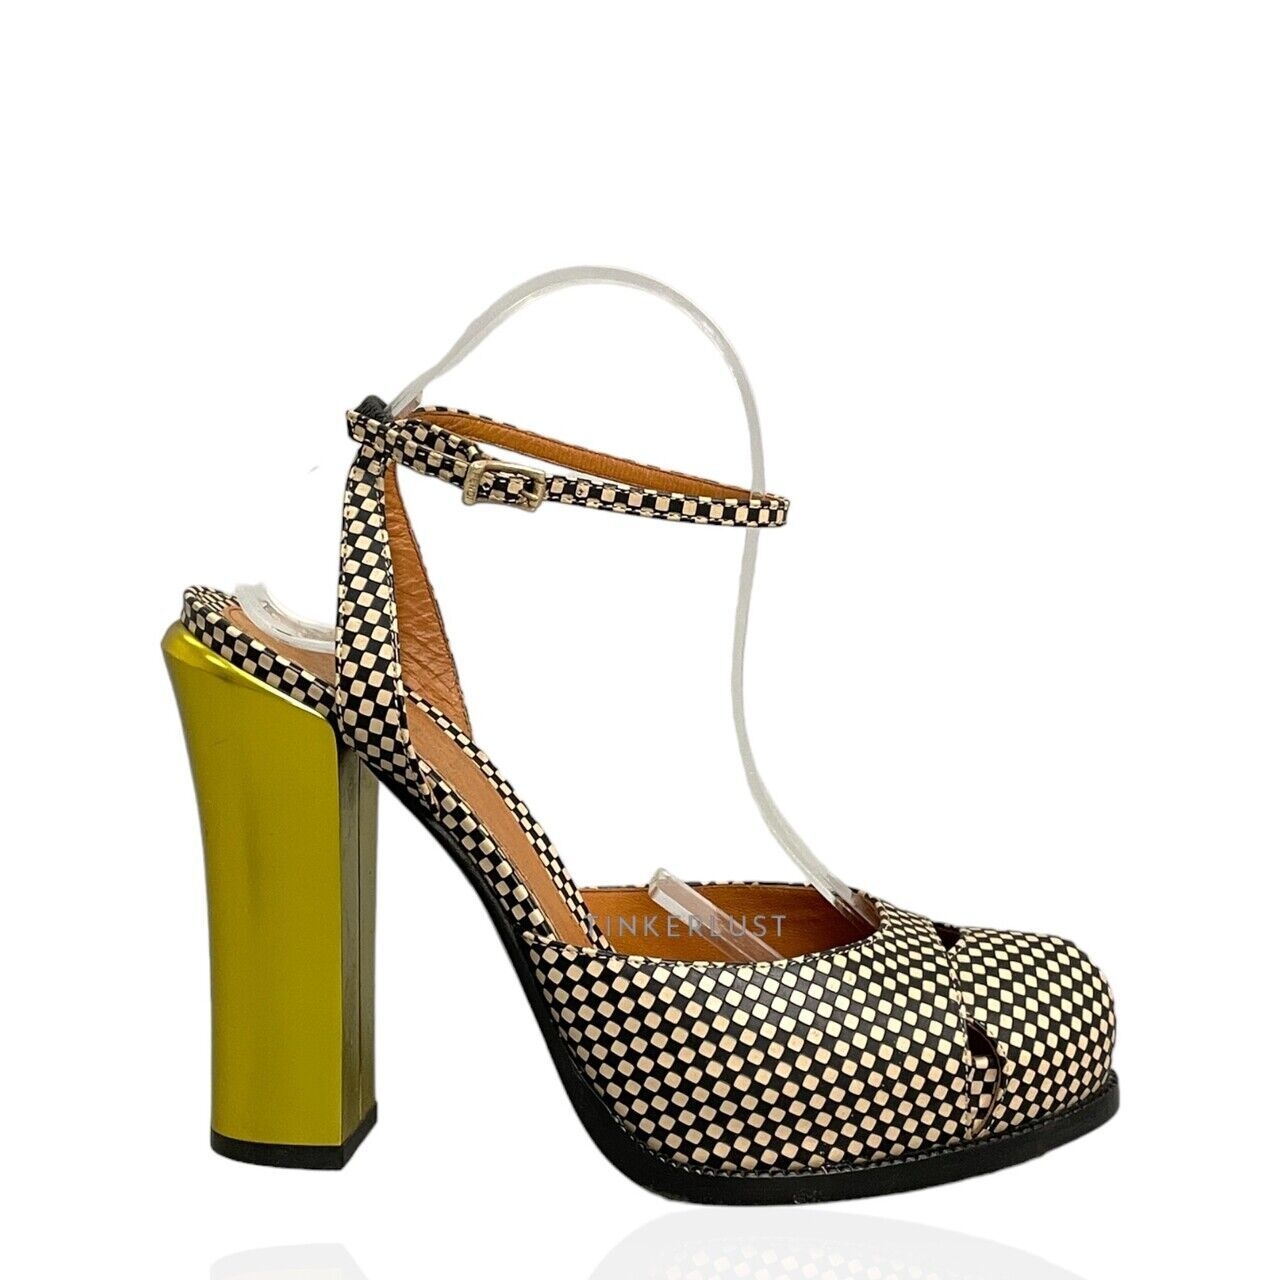 Fendi Two-tone Checkered Leather Ankle Strtap Pumps Heels